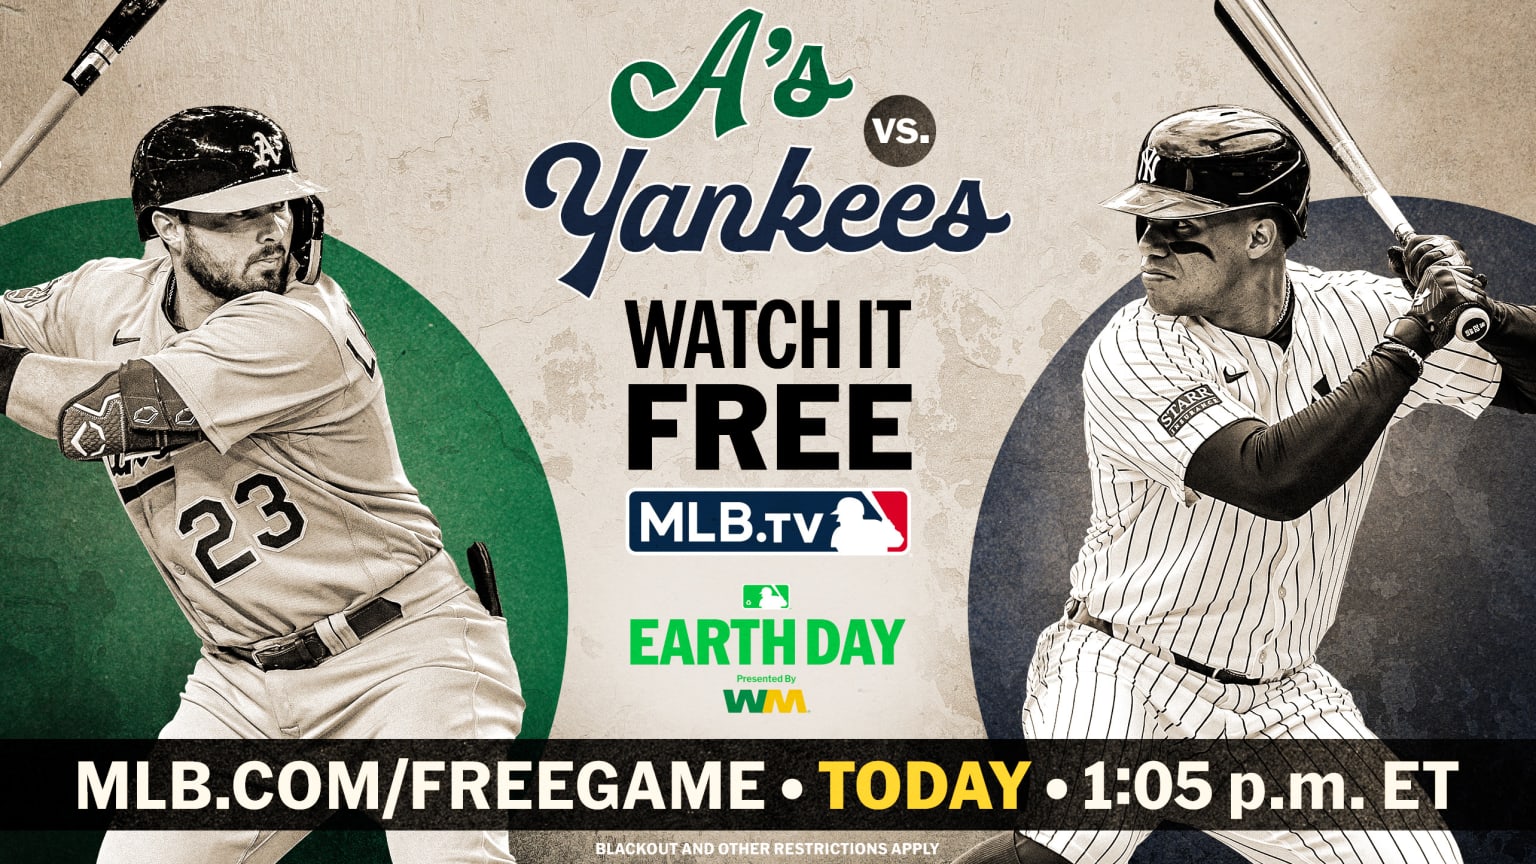 Shea Langeliers and Juan Soto with text promoting the MLB.TV free game between the A's and Yankees